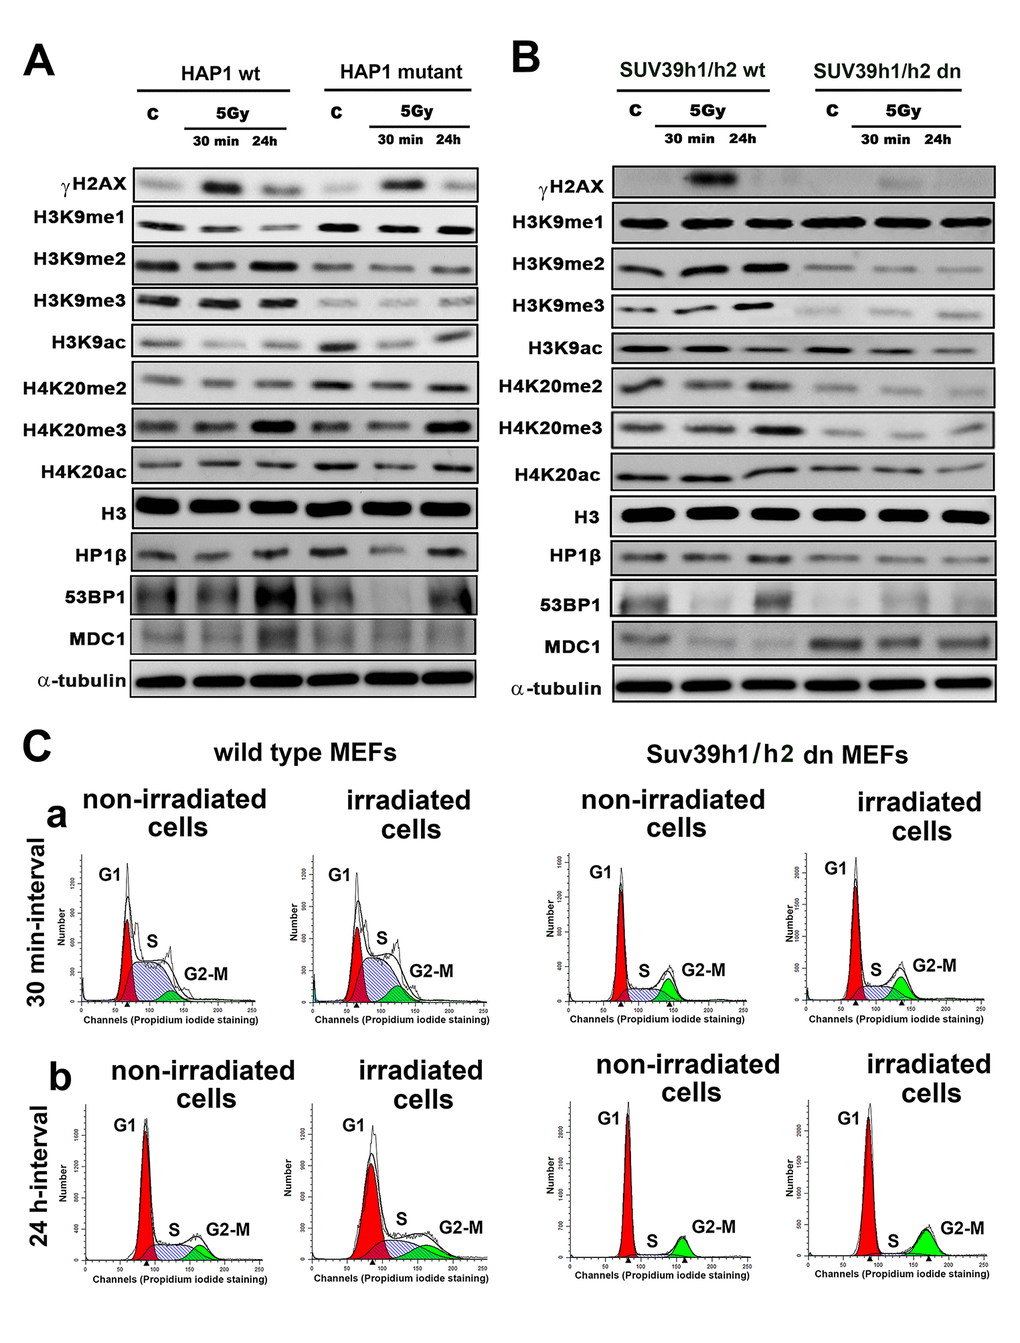 Histone signature in non-irradiated and irradiated cells without and with mutation or deletion in Suv39h1/h2 histone methyltransferases. Western blot analysis of γH2AX, H3K9me1, H3K9me2, H3K9me3, H3K9ac, H4K20me2, H4K20me3 and H4K20 acetylation. The levels of modified histones were normalized to that of total H3 histones. As DNA damage markers, 53BP1, MDC1 proteins, and the HP1β protein were studied and normalized to the level of α-tubulin. Protein levels were studied in (A) HAP1 wt and HAP1 cells with the mutation in the SUV39H1 gene and (B) in wt MEFs and Suv39h1/h2-deficient fibroblasts (MEFs). Non-irradiated cells and cells irradiated by 5 Gy of γ-rays (harvested 30 min and 24 hours after irradiation) were analyzed. (C) Cell cycle profiles were studied by flow cytometry in non-irradiated and γ-irradiated wt MEFs and non-irradiated and γ-irradiated Suv39h1/h2 dn mouse embryonic fibroblasts. Panel (a) shows a 30-min interval, and panel (b) shows a 24-h interval when the cells were harvested after irradiation (and related control samples). Using Mod-Fit software, the percentage of cells in G1 (red peak), S (dash blue peak) and G2-M (green peak) cell cycle phases was calculated. The average cell cycle profile is shown for individual samples, and experiments were performed in 3 biological replicates.